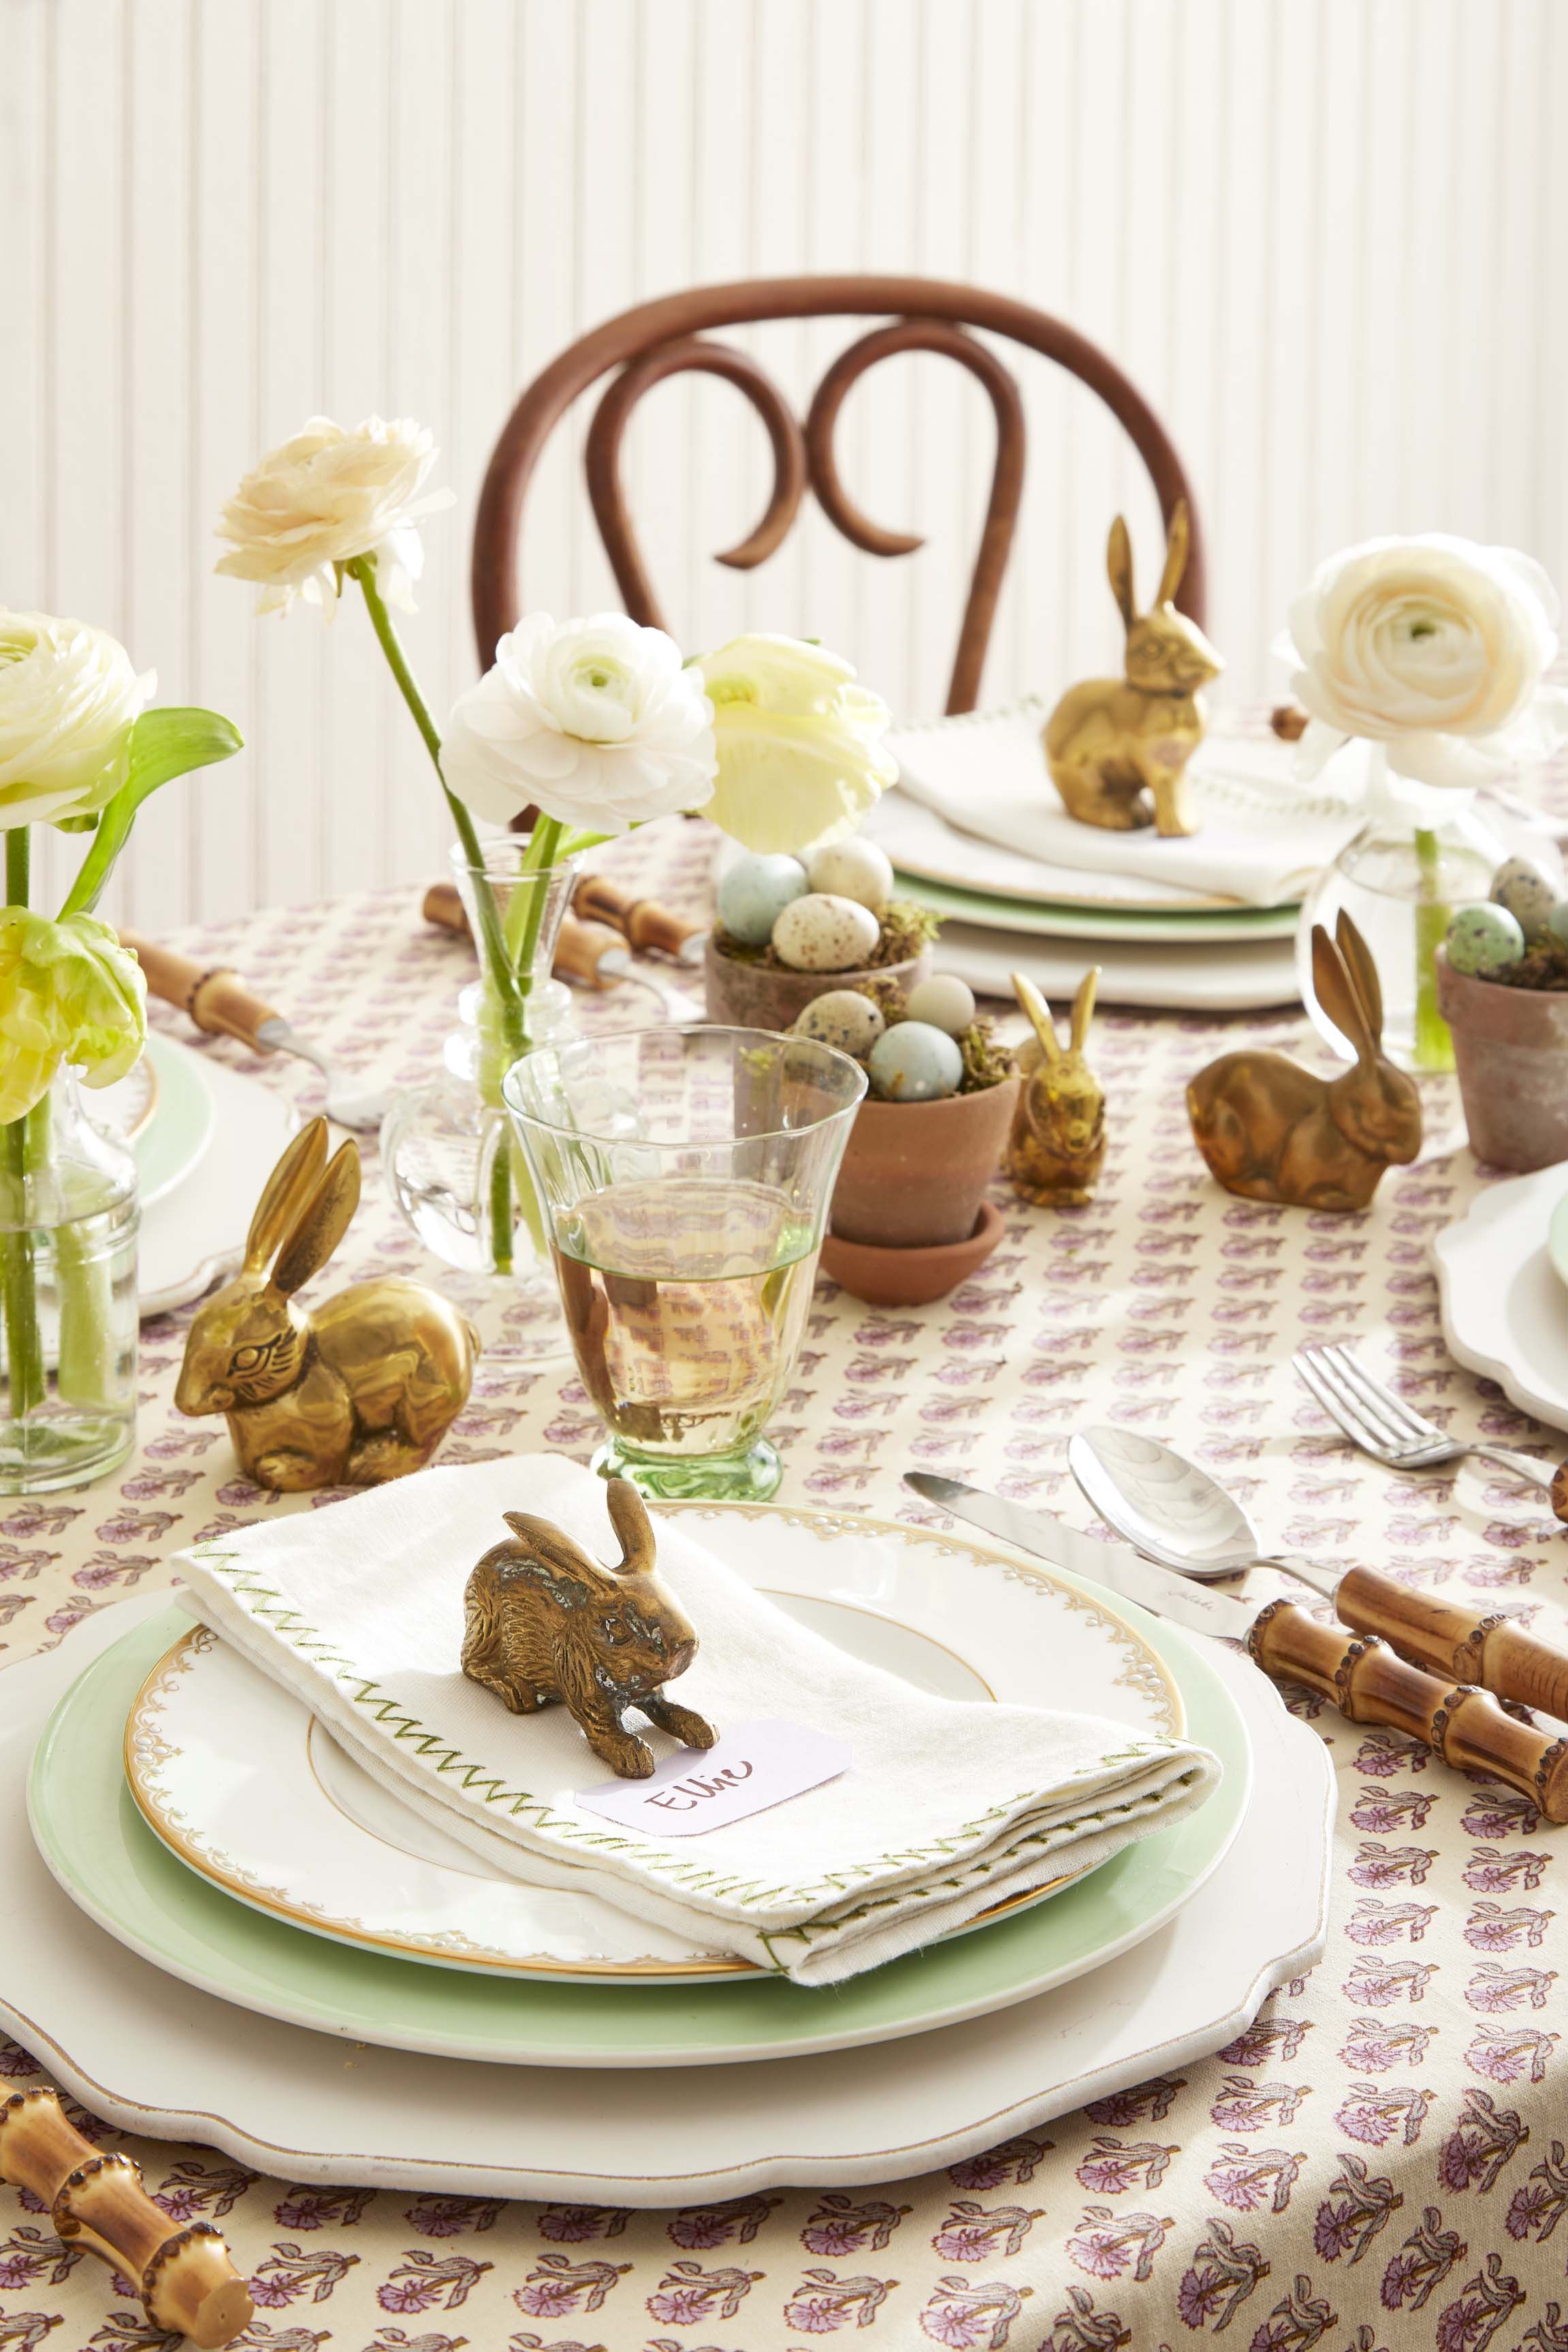 Easter Decorating in the Kitchen - Simple Ideas for Easter Decor